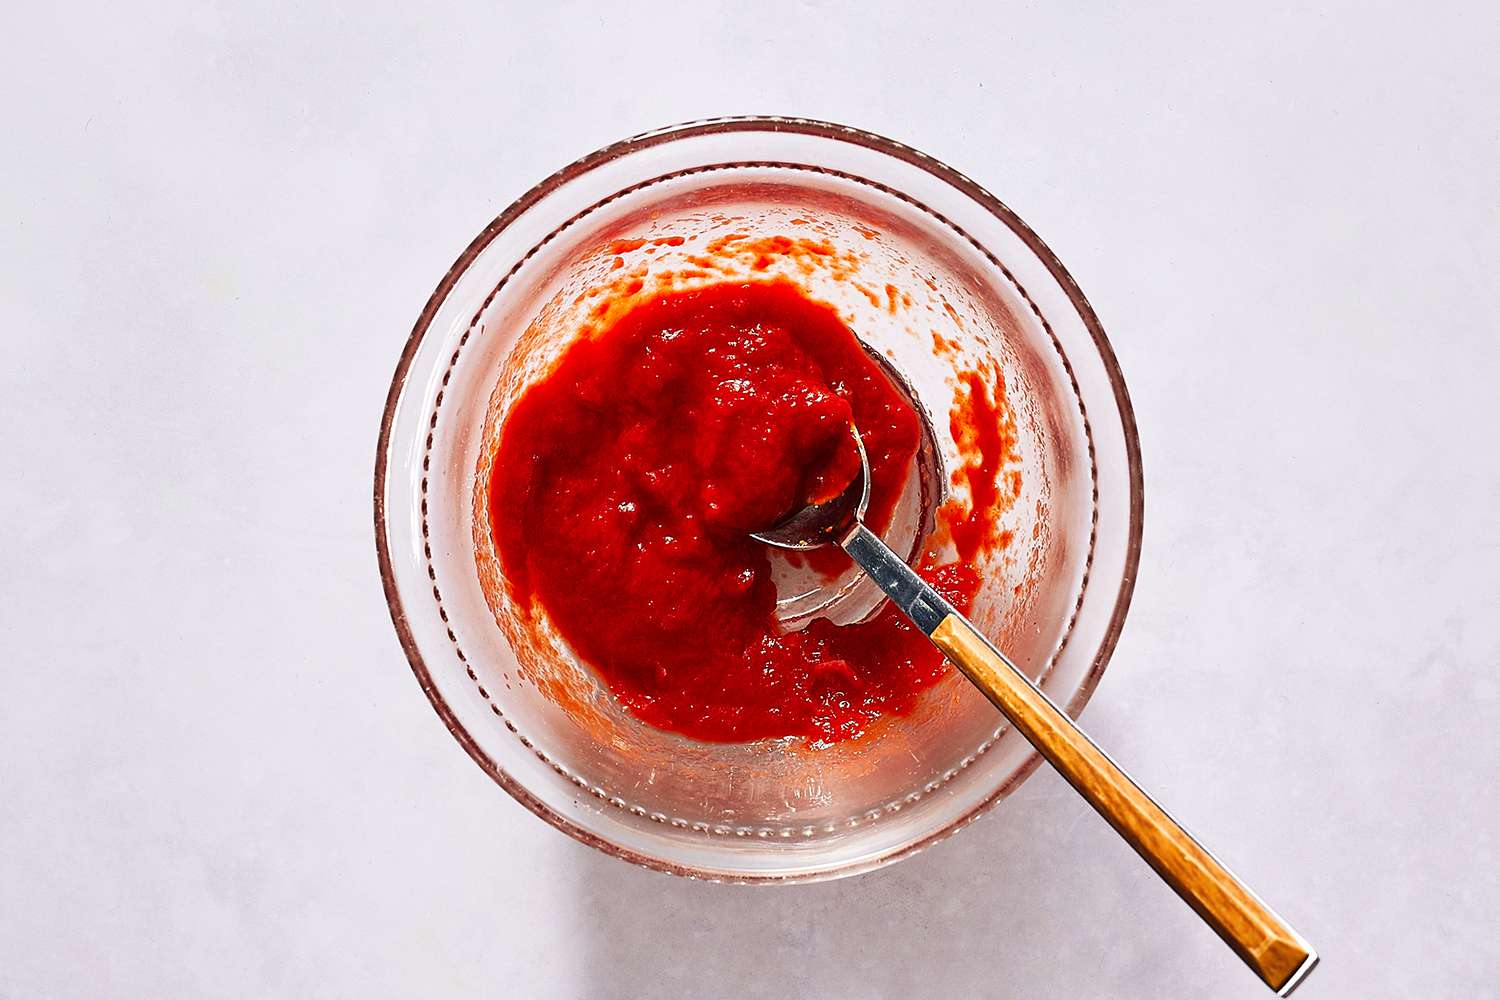 Tomato sauce in a glass bowl with a spoon